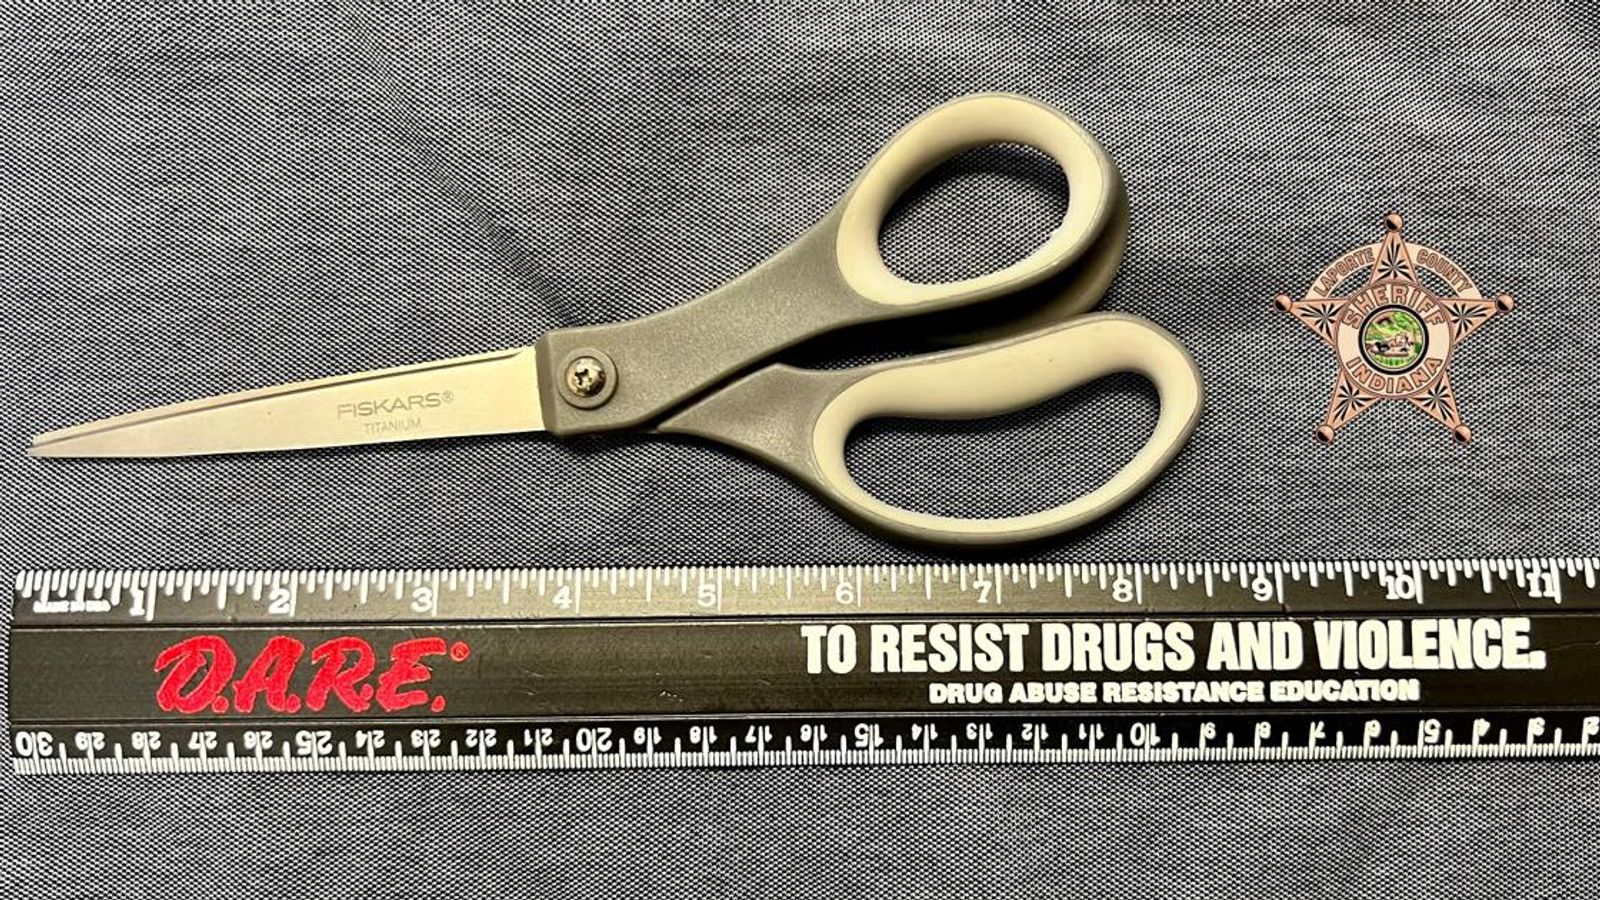 A pair of scissors that was found in the 'anal cavity' of a man at La Porte County Jail in Indiana, USA. May 2023 Source: La Porte County Sheriff's Office official Facebook page